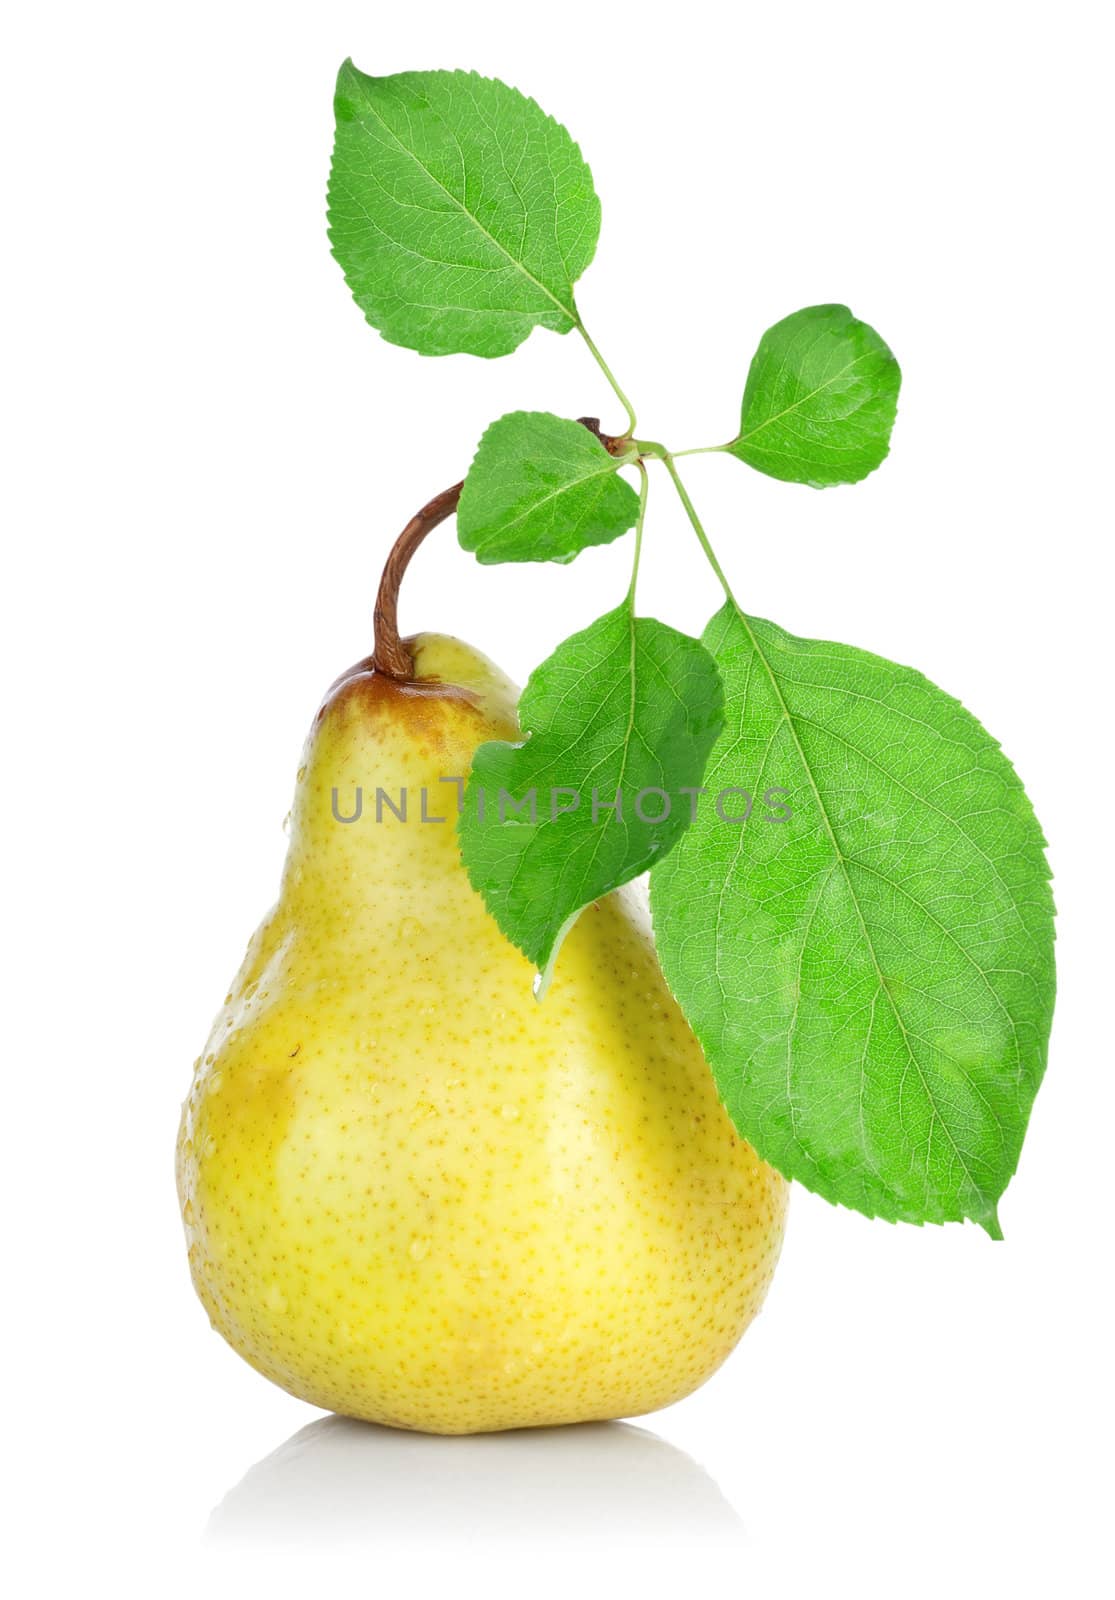 Pear with Leafs by Givaga